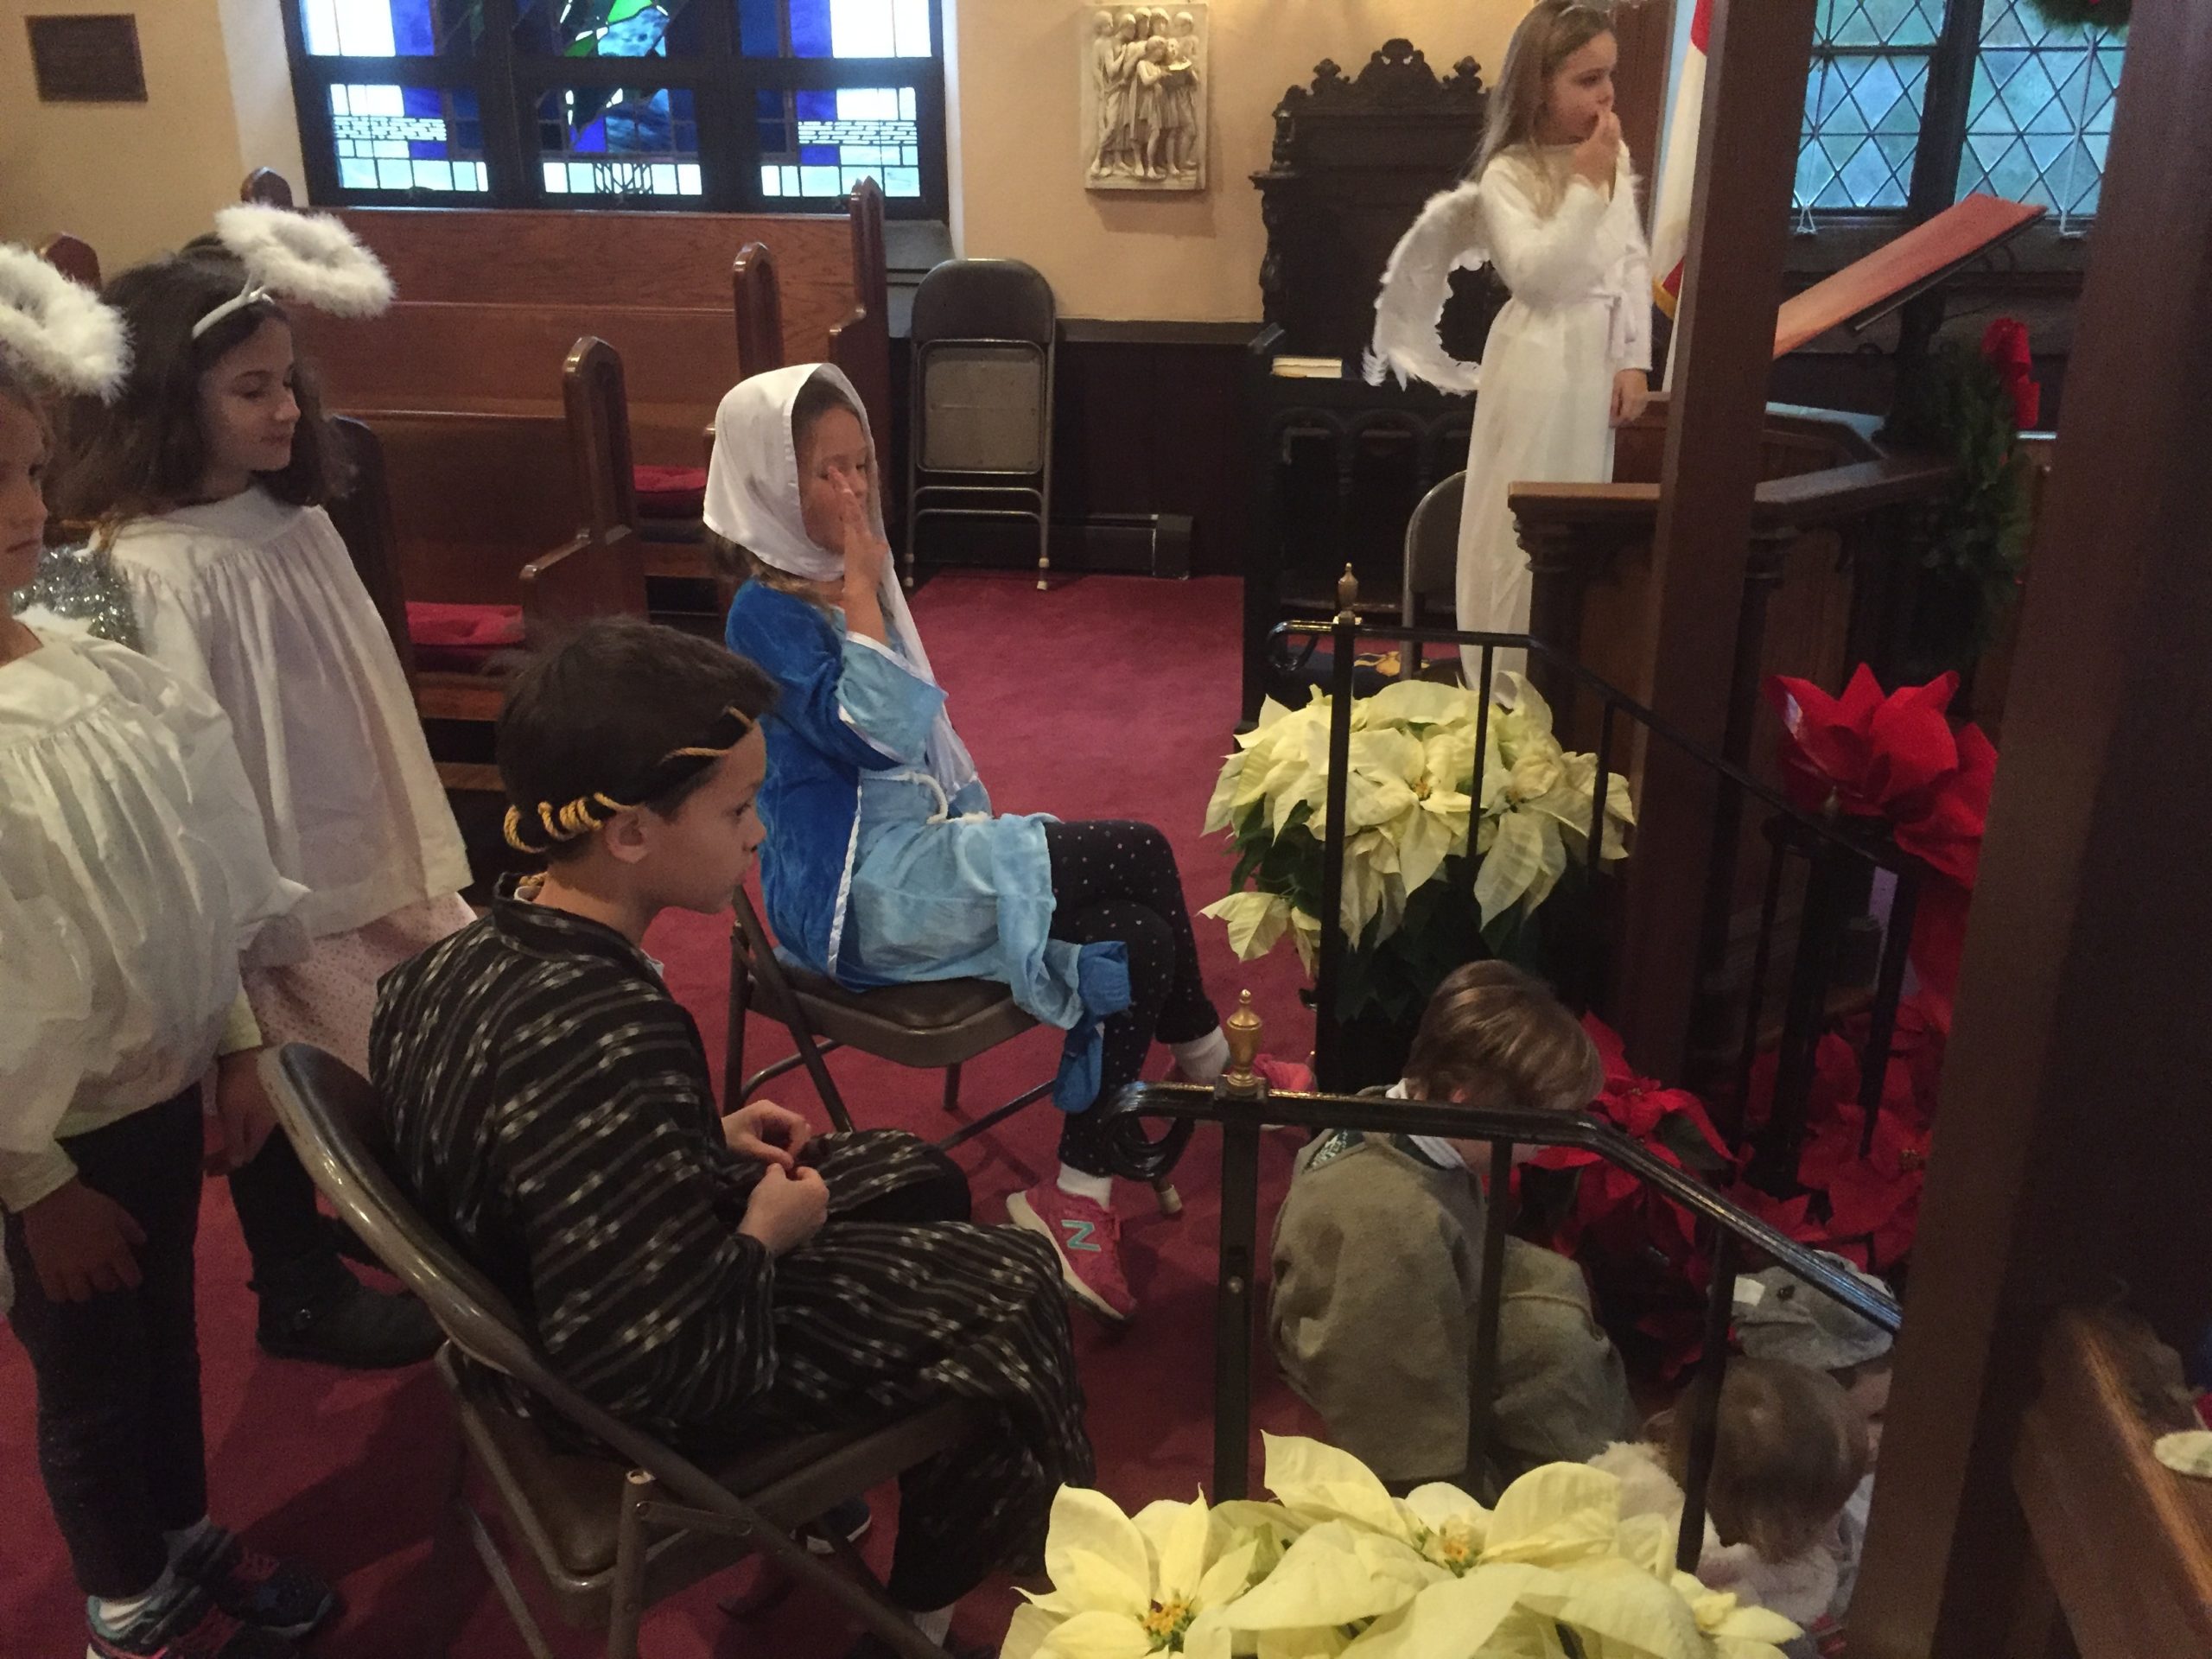 The Christmas Pageant at St. John's Episcopal Church in Southampton.